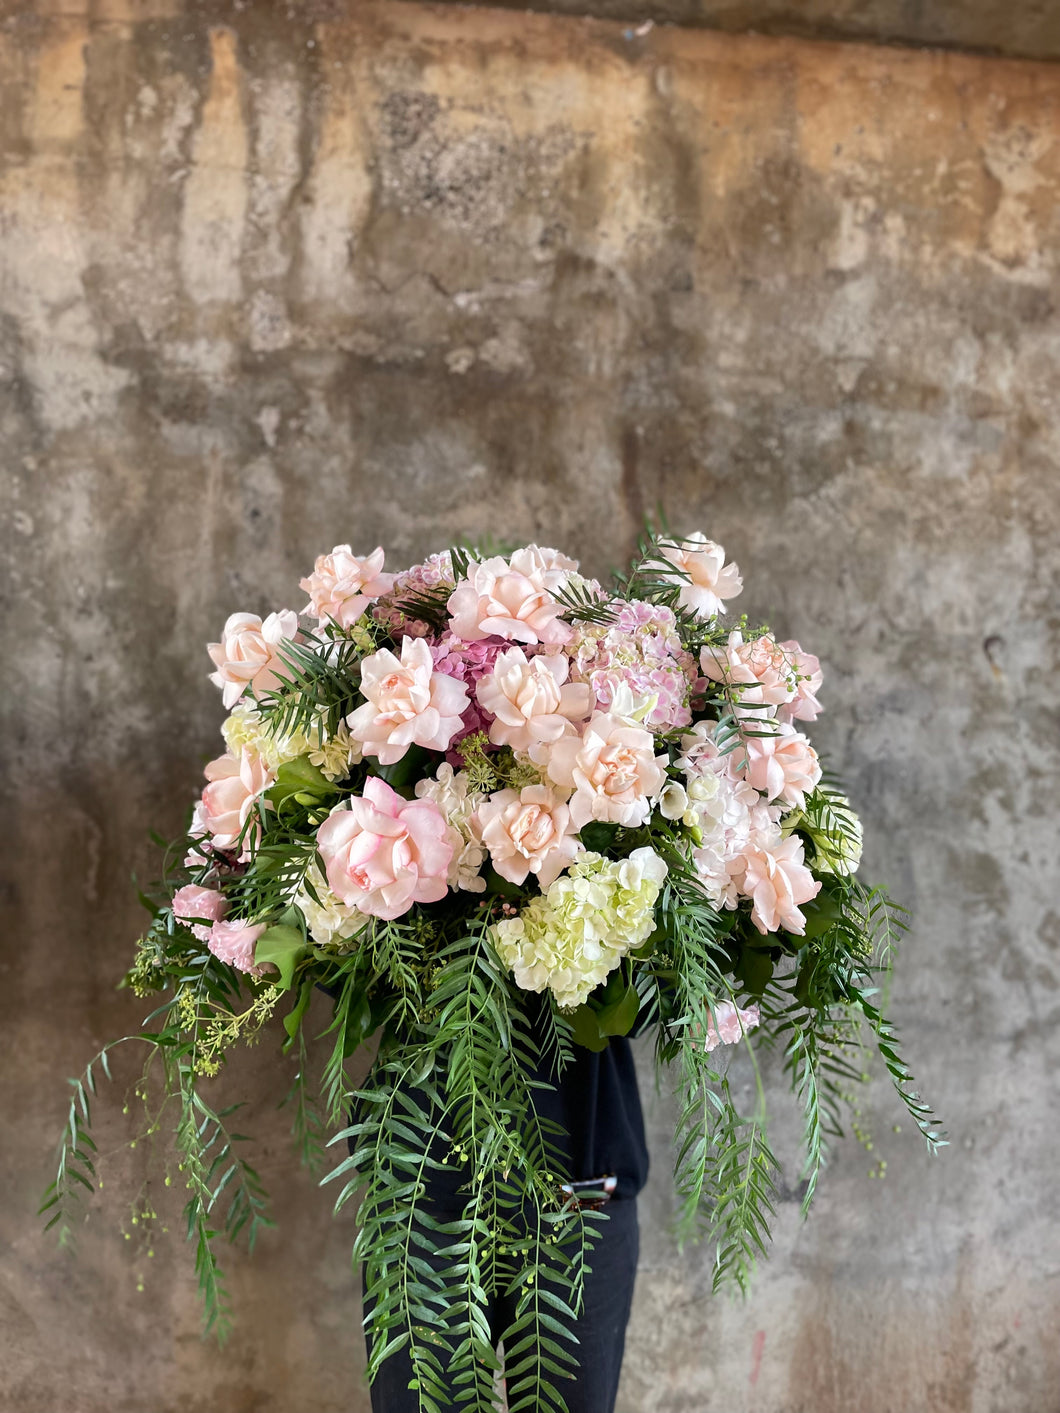 Pastel pink, white and green casket design, held by a florist wearing back, up against a concrete wall.